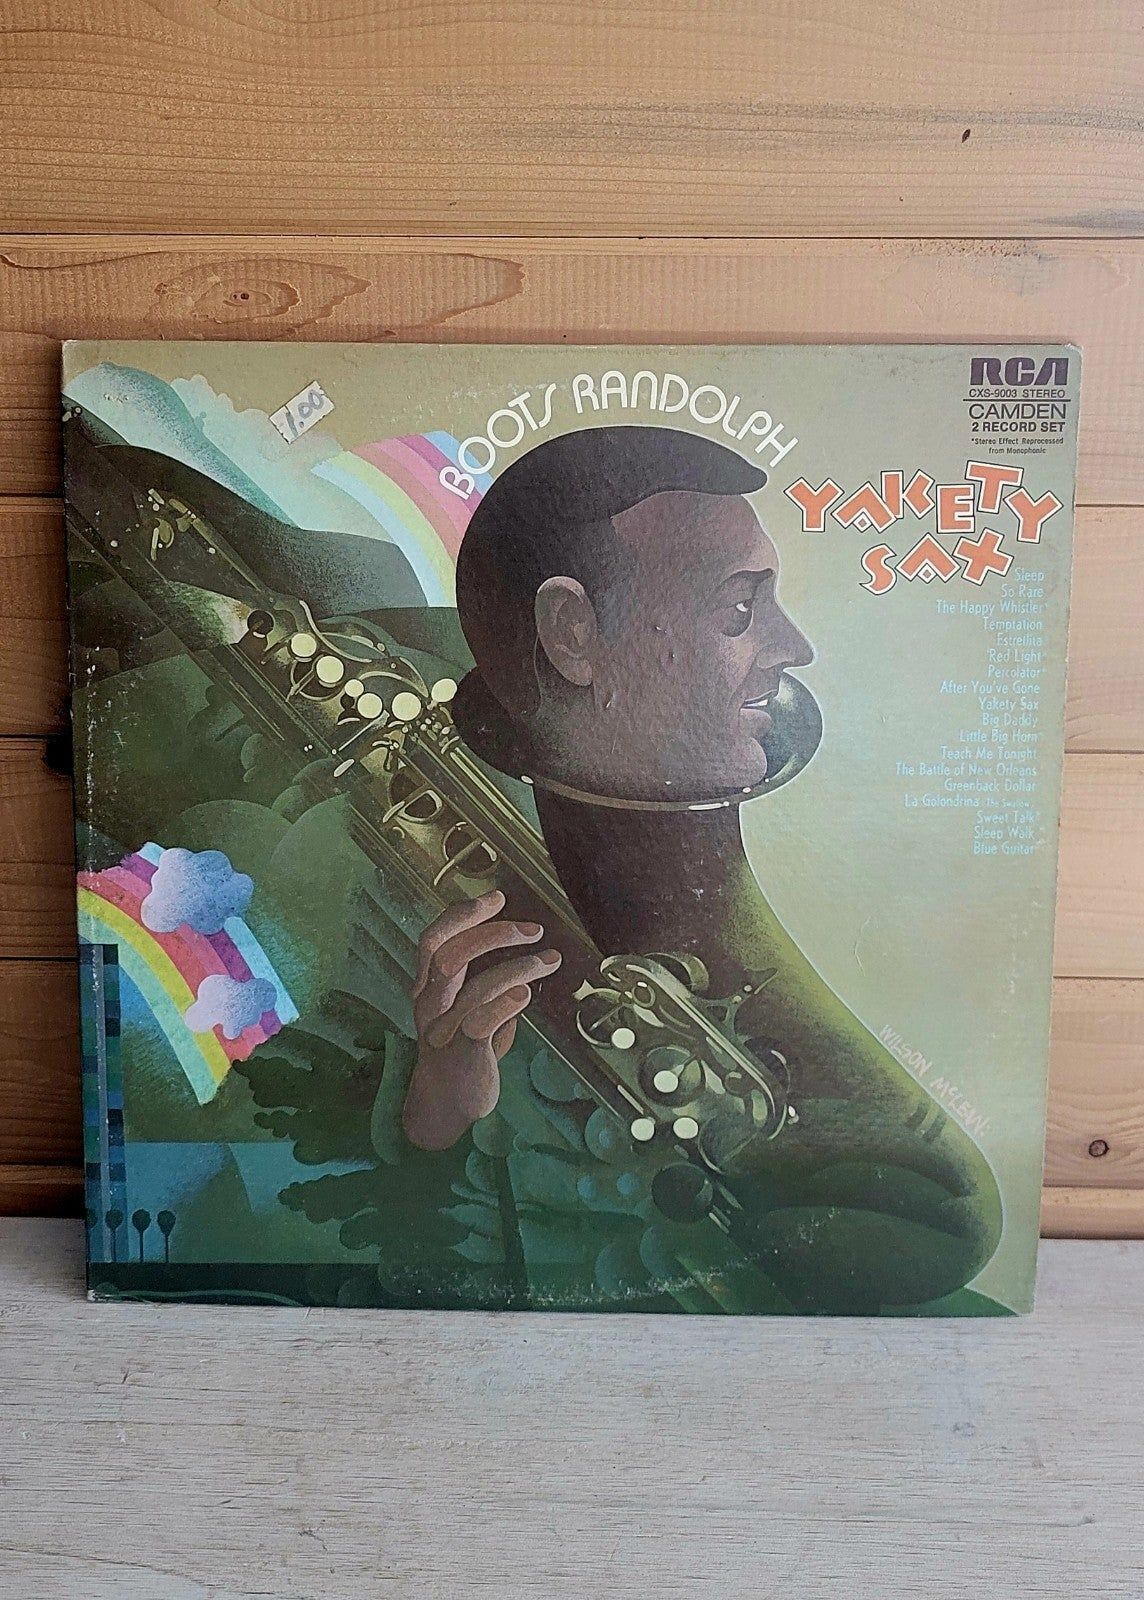 Primary image for Boots Randolph Yakety Sax Jazz Vinyl 1971 RCA Record DOUBLE LP 33 RPM 12"